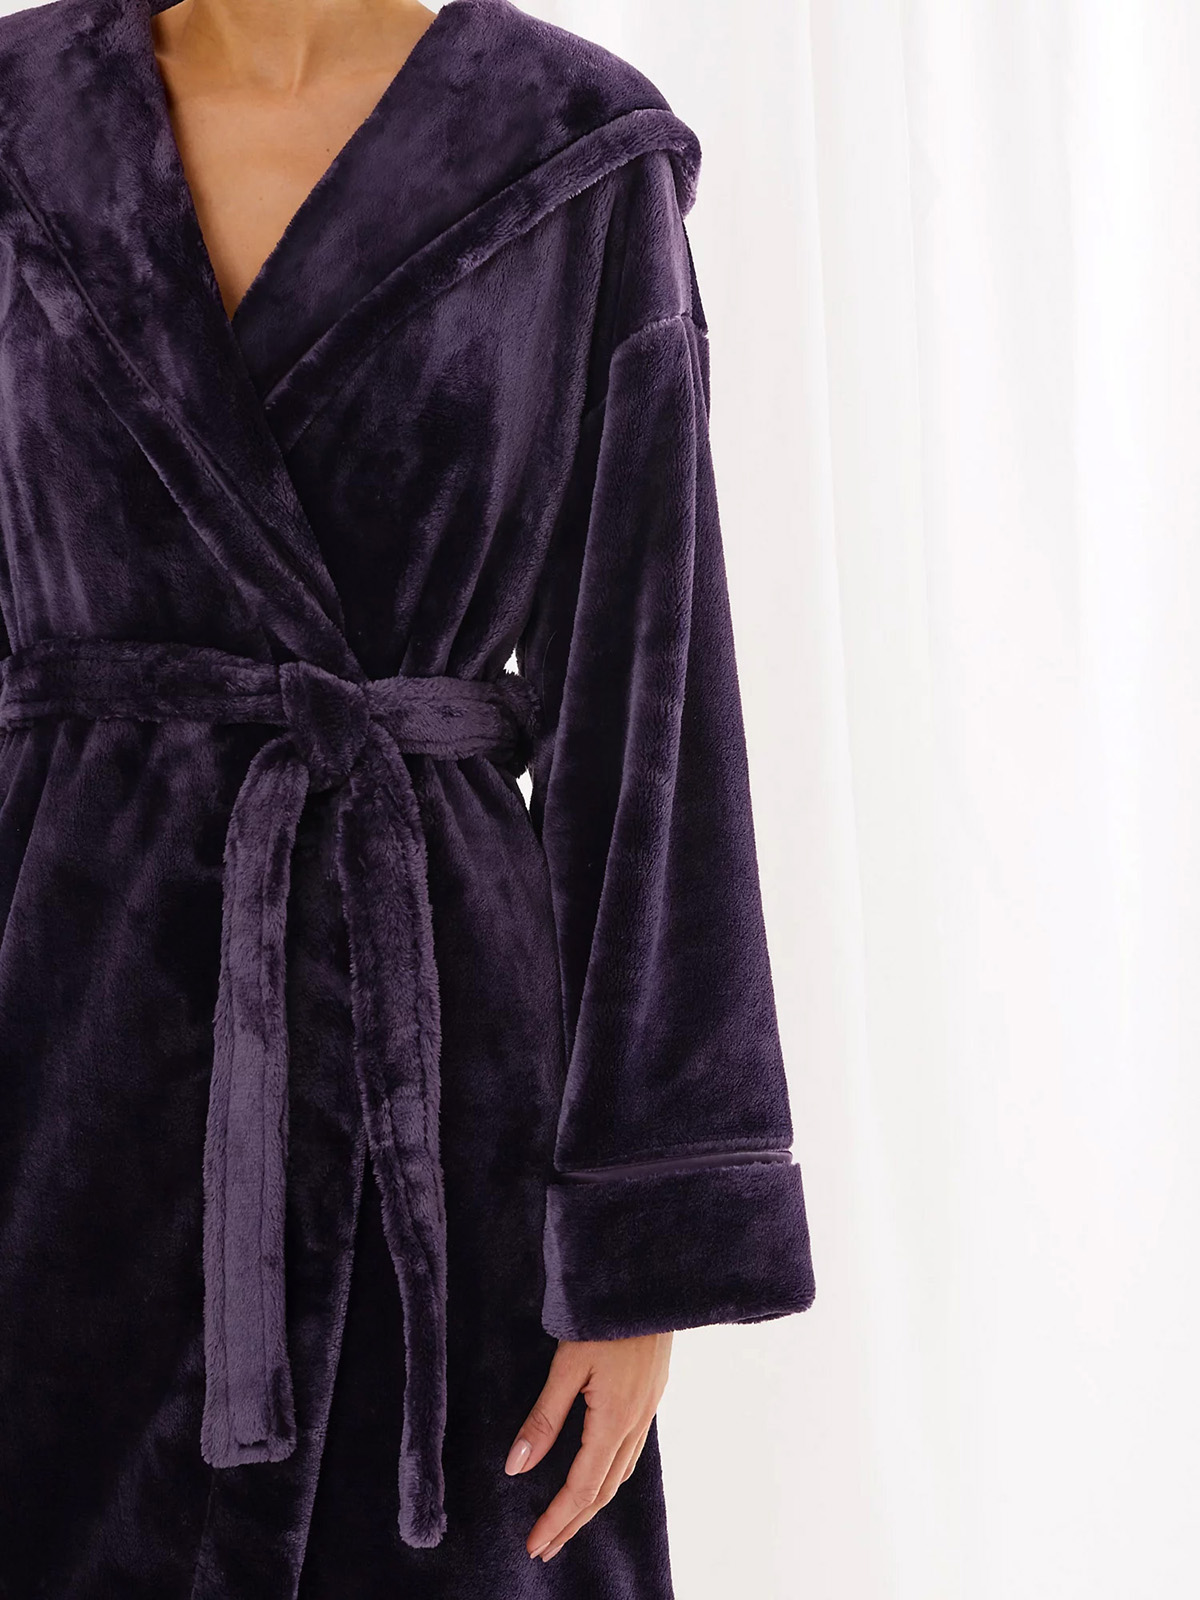 Marks and Spencer - - M&5 PURPLE Supersoft Hooded Dressing Gown - Size ...